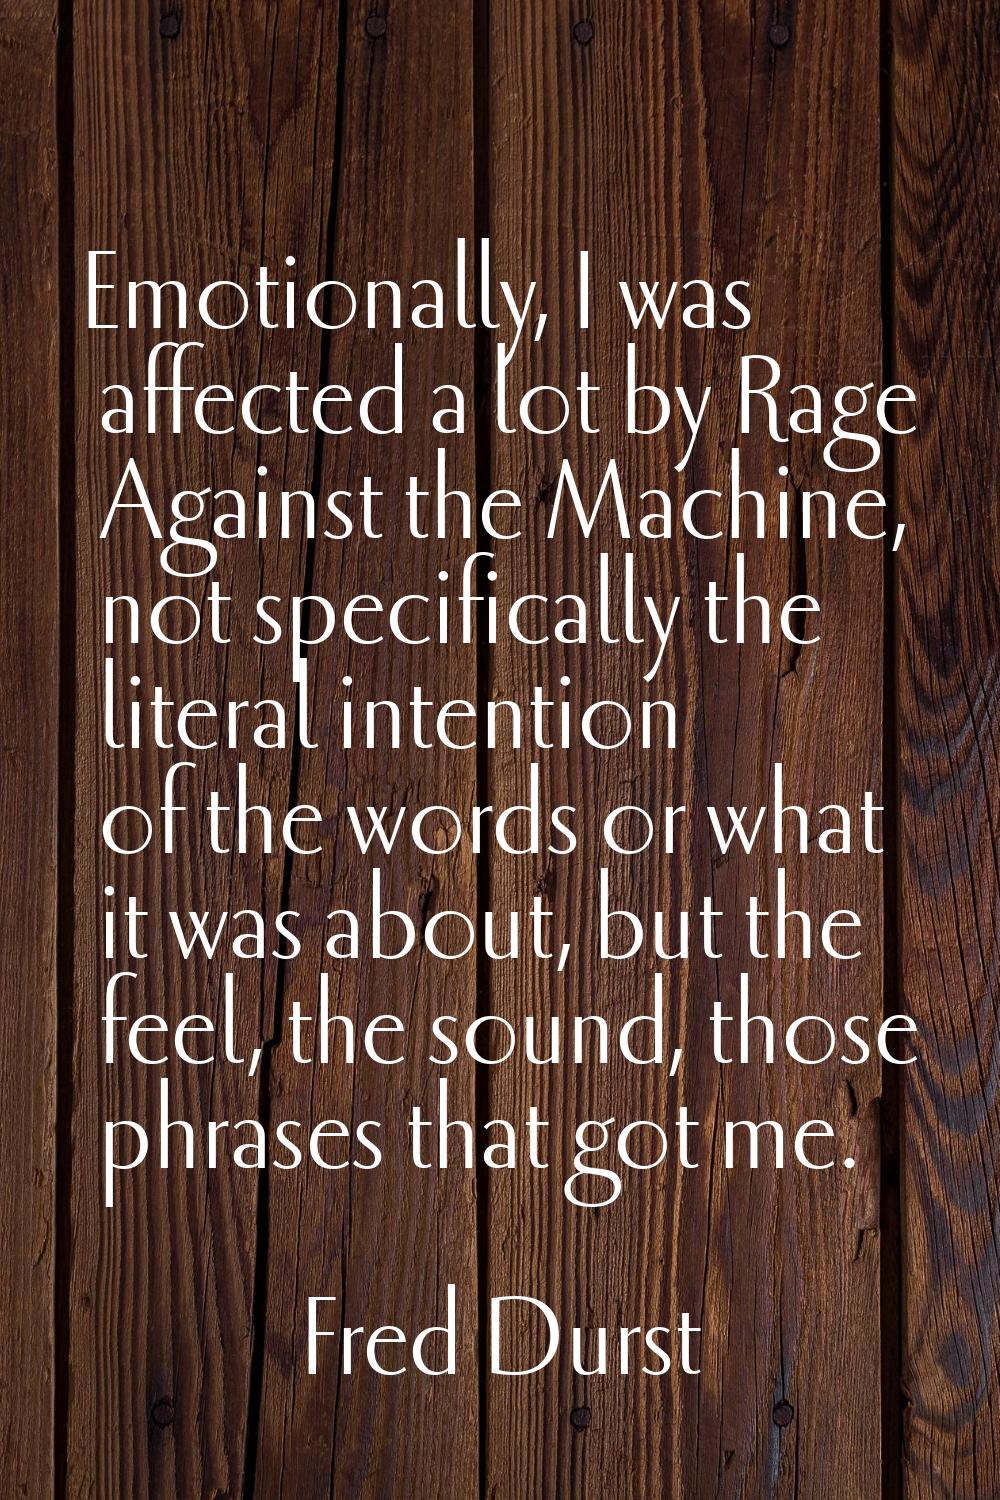 Emotionally, I was affected a lot by Rage Against the Machine, not specifically the literal intenti